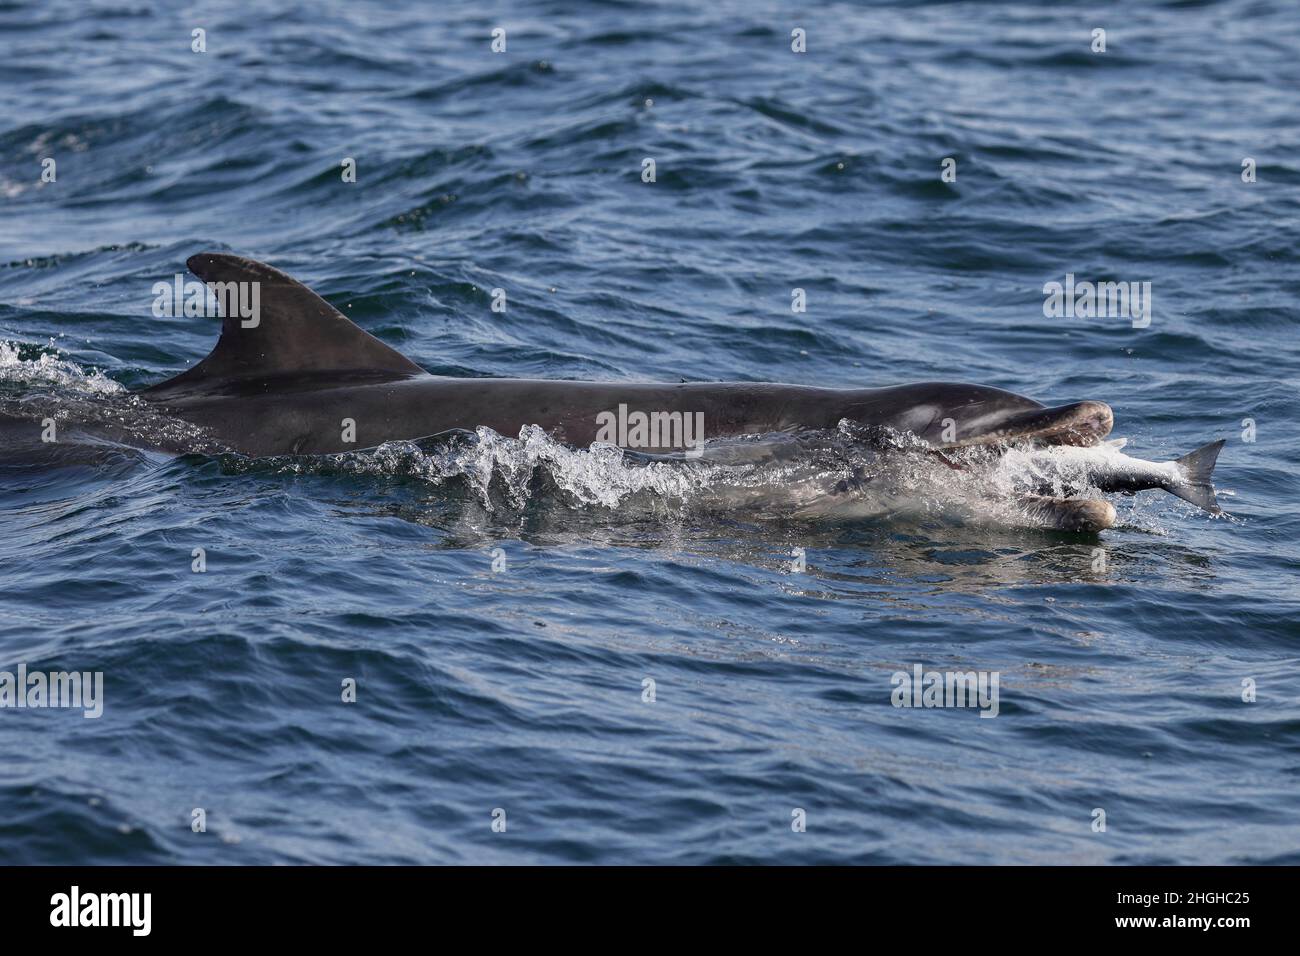 A resident Bottlenose dolphin captures a migrating wild Atlantic salmon near the Black Isle coastline, Moray Firth, Scotland and is swallowing it . Stock Photo